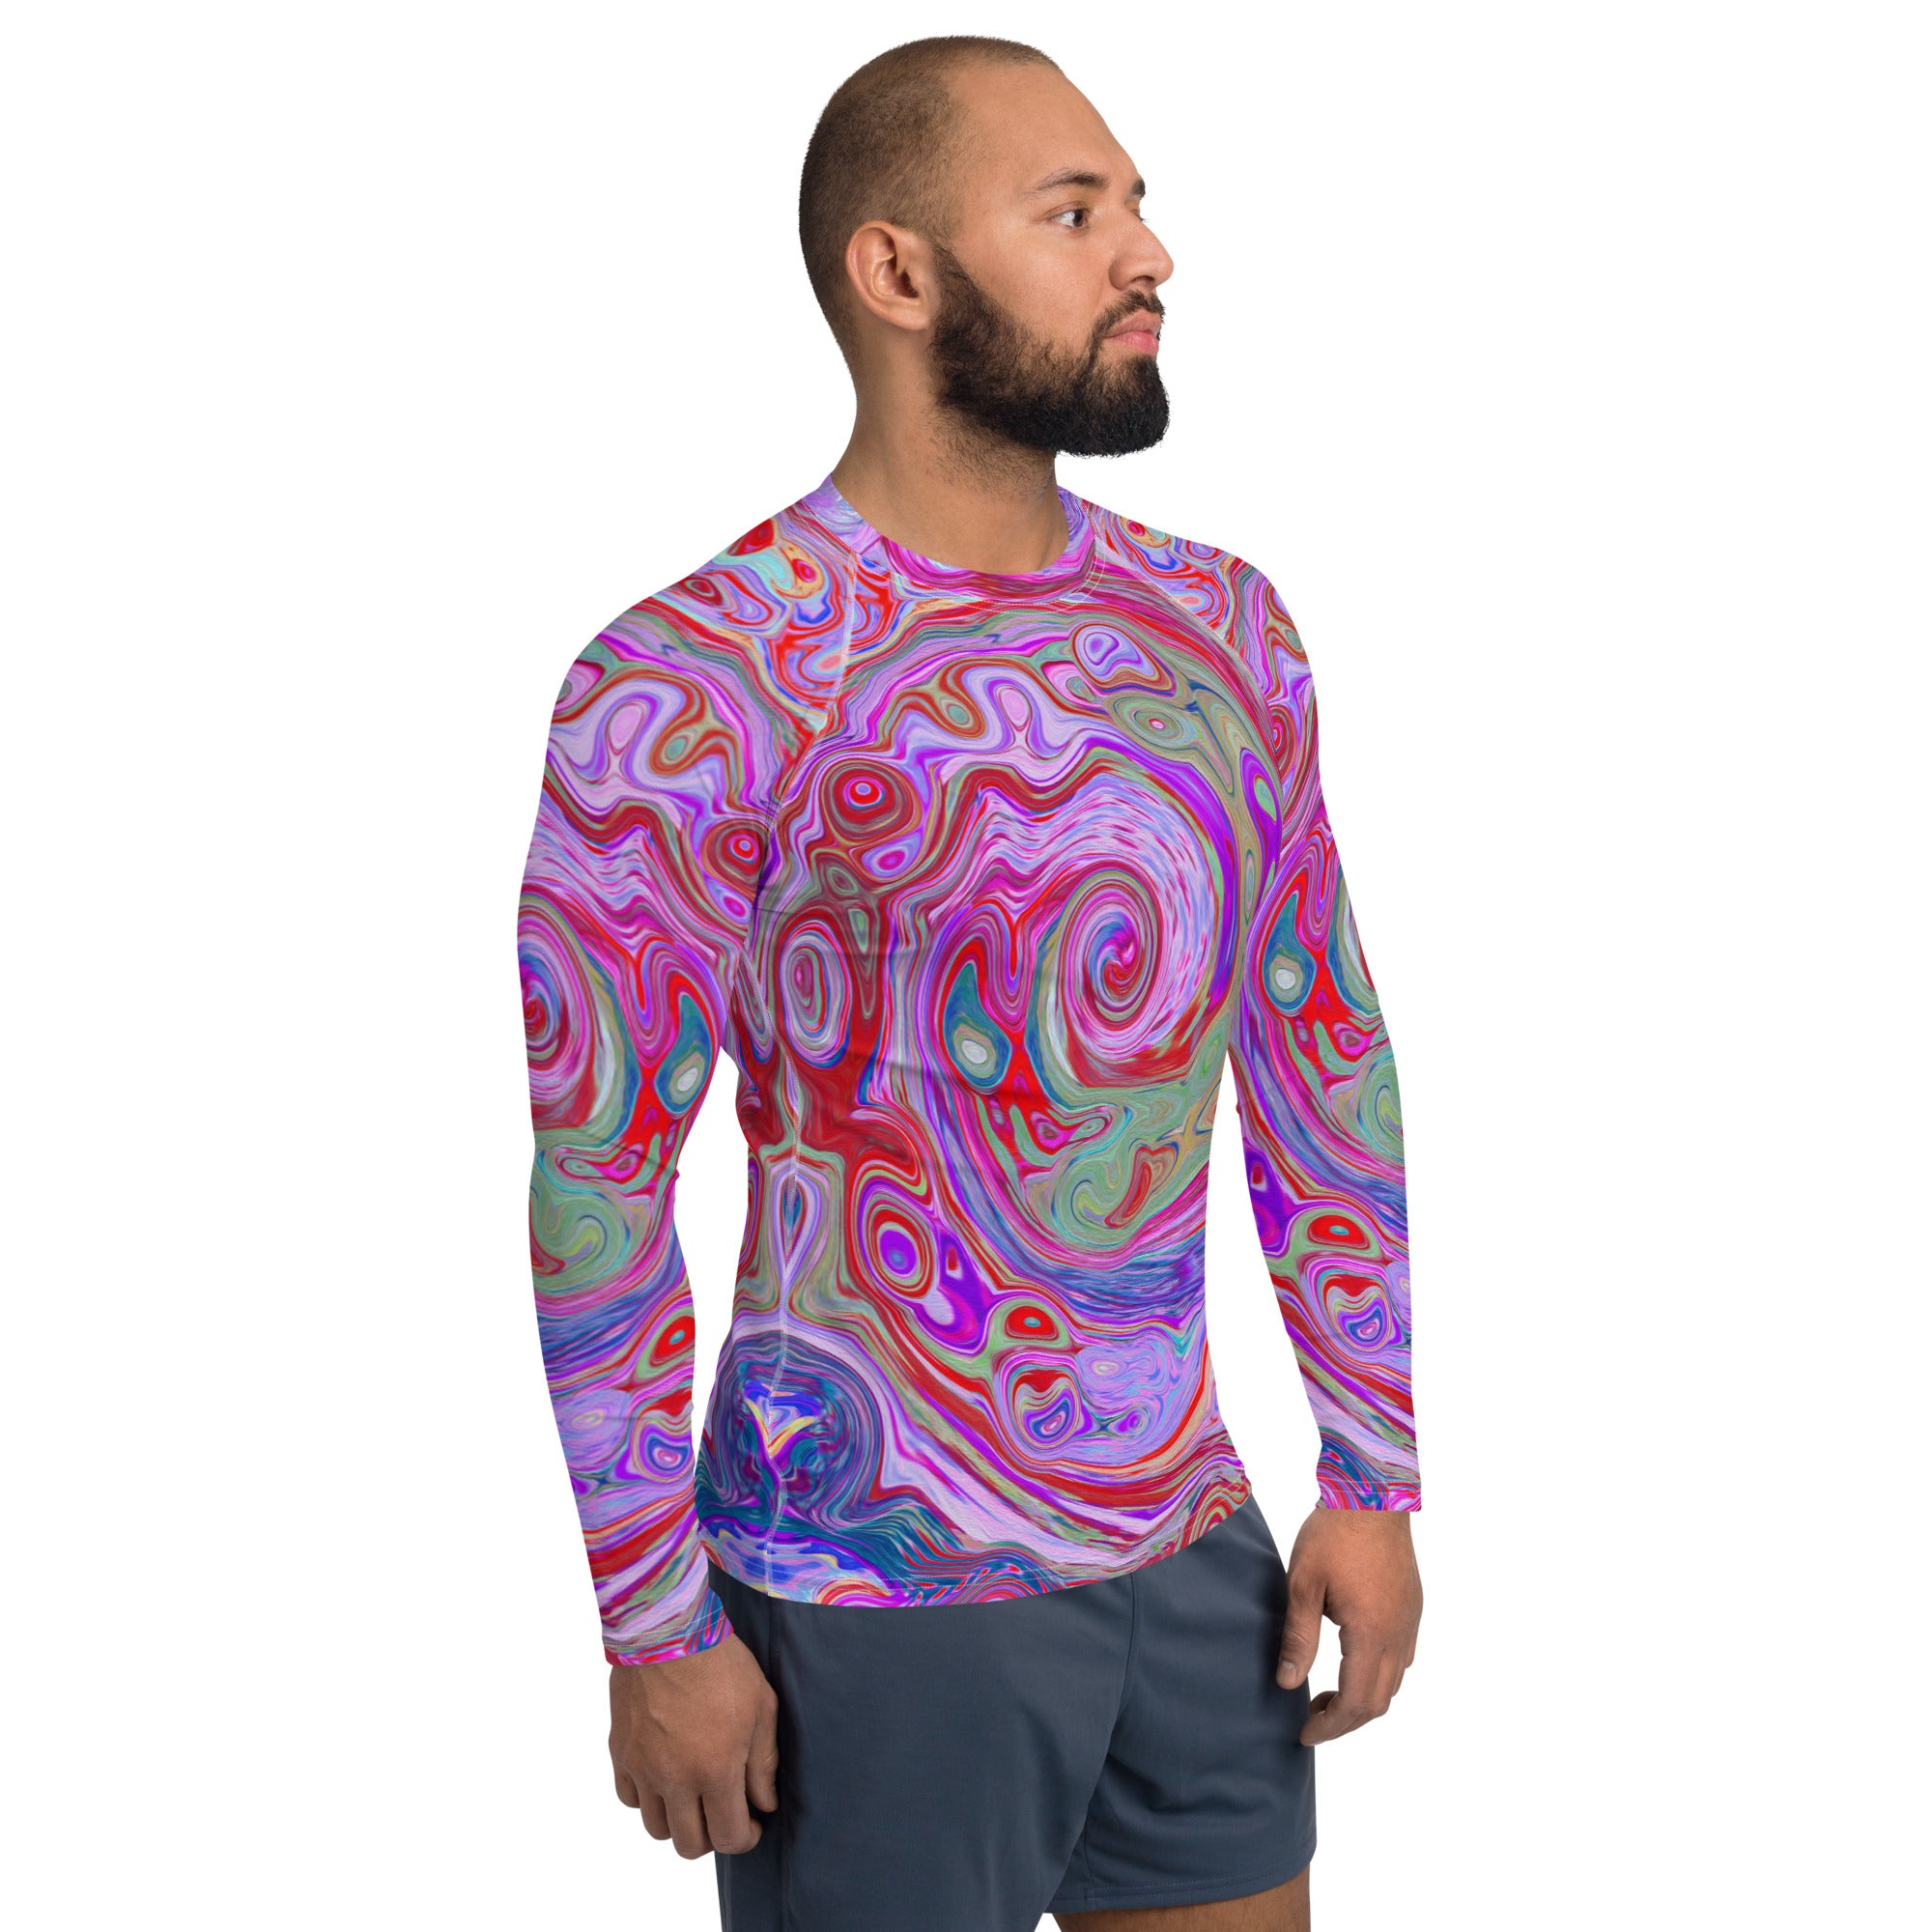 Men's Athletic Rash Guard Shirts, Groovy Abstract Retro Red, Purple and Pink Swirl